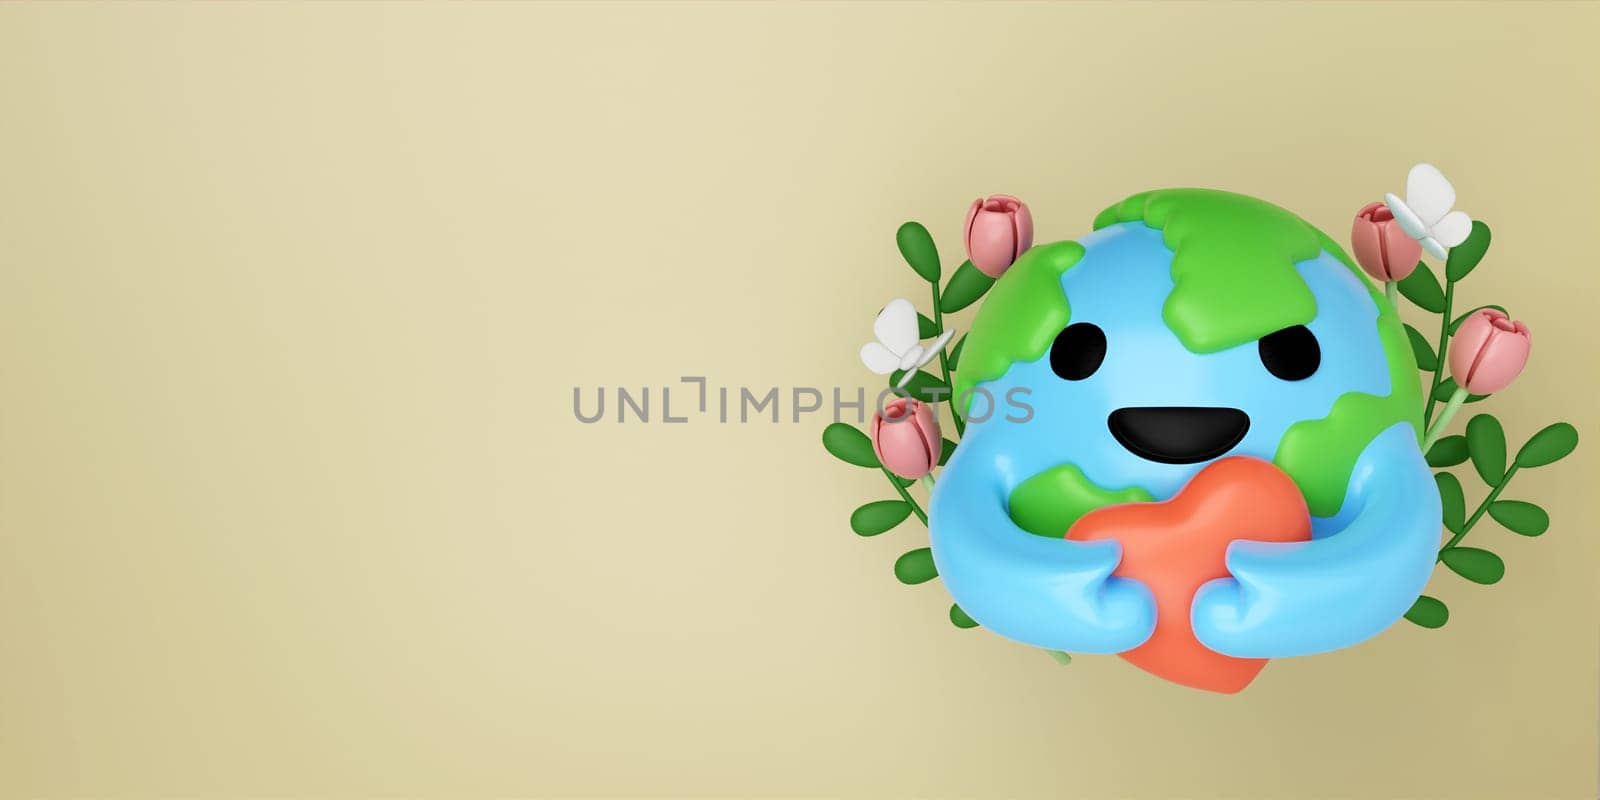 3d planet hug heart with flower and butterfly on yellow background. Concept of Save the Earth, Protect environmental and eco green life, ecology and nature protect. 3d rendering illustration. by meepiangraphic